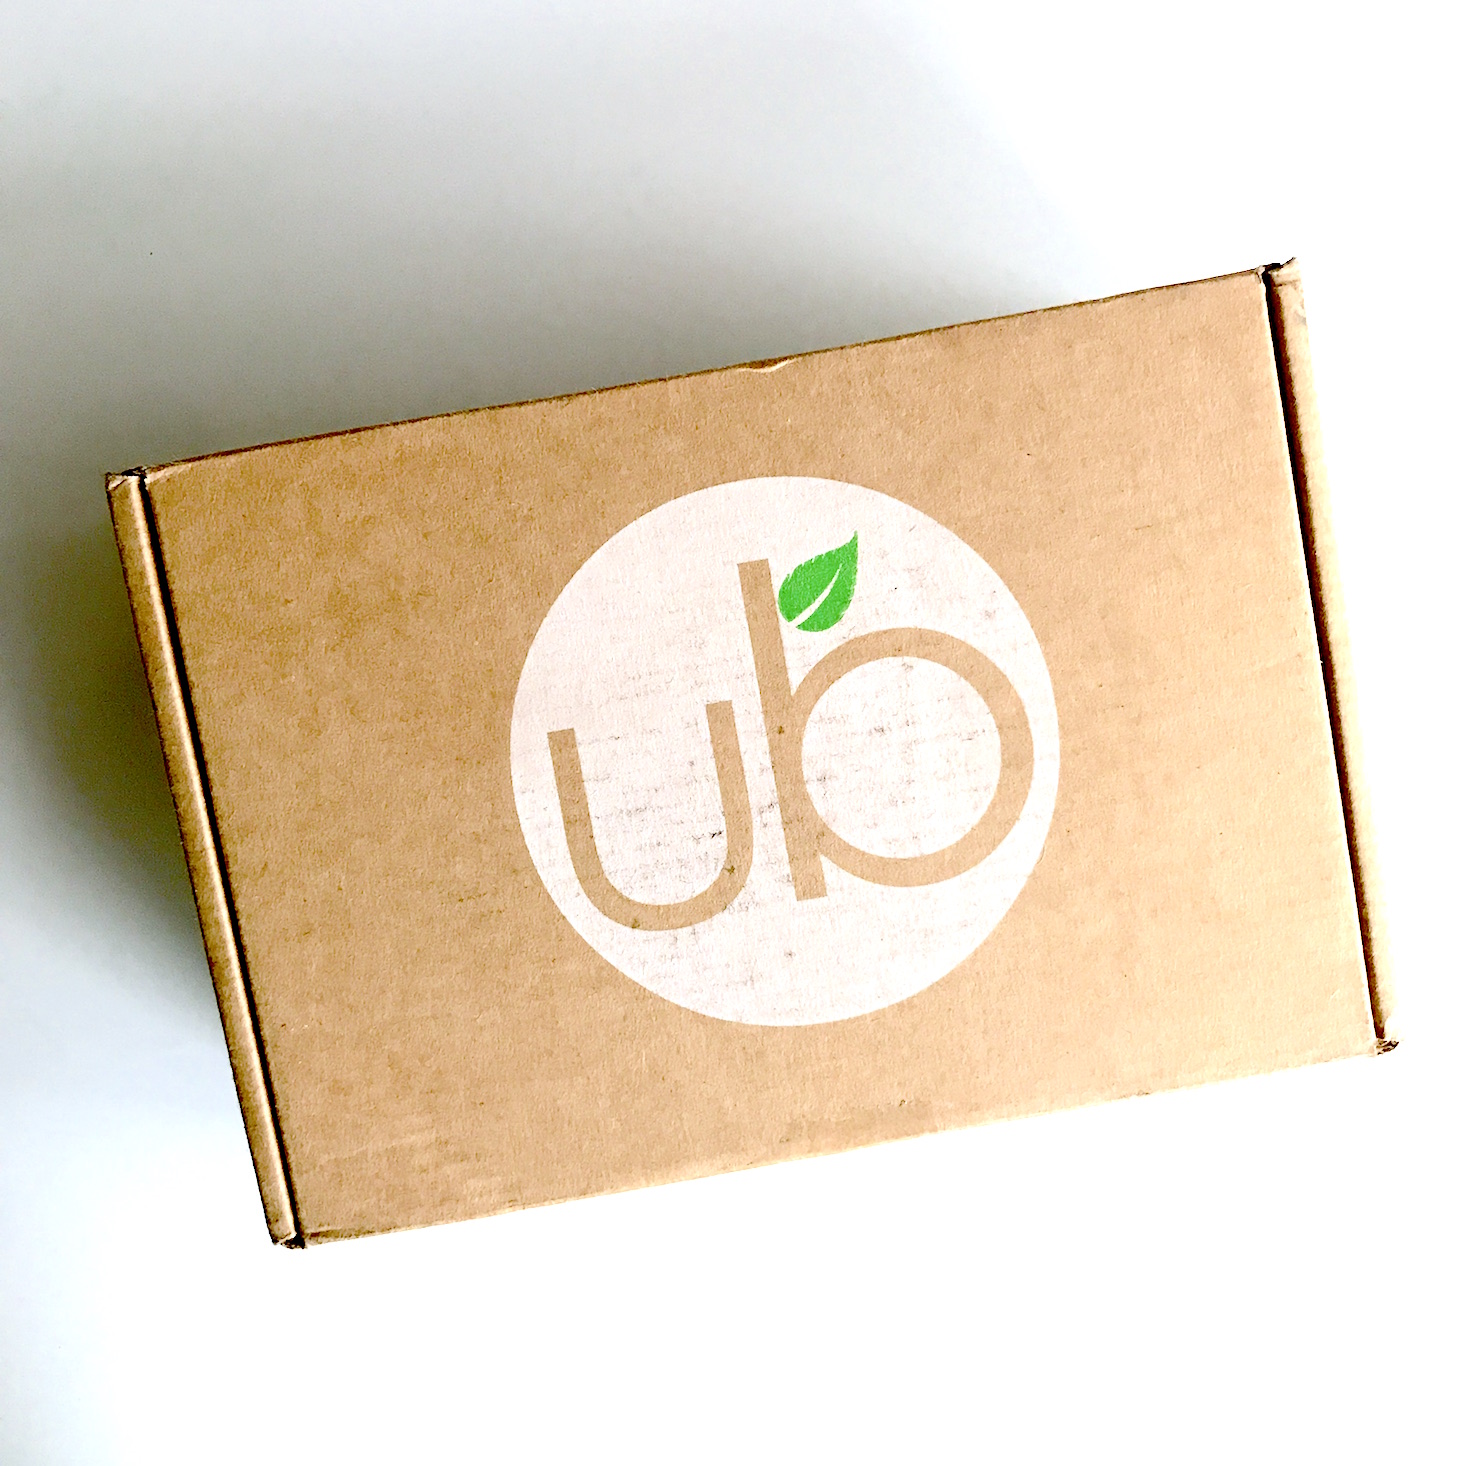 UrthBox Subscription Box Review + Free Box Coupon – October 2017